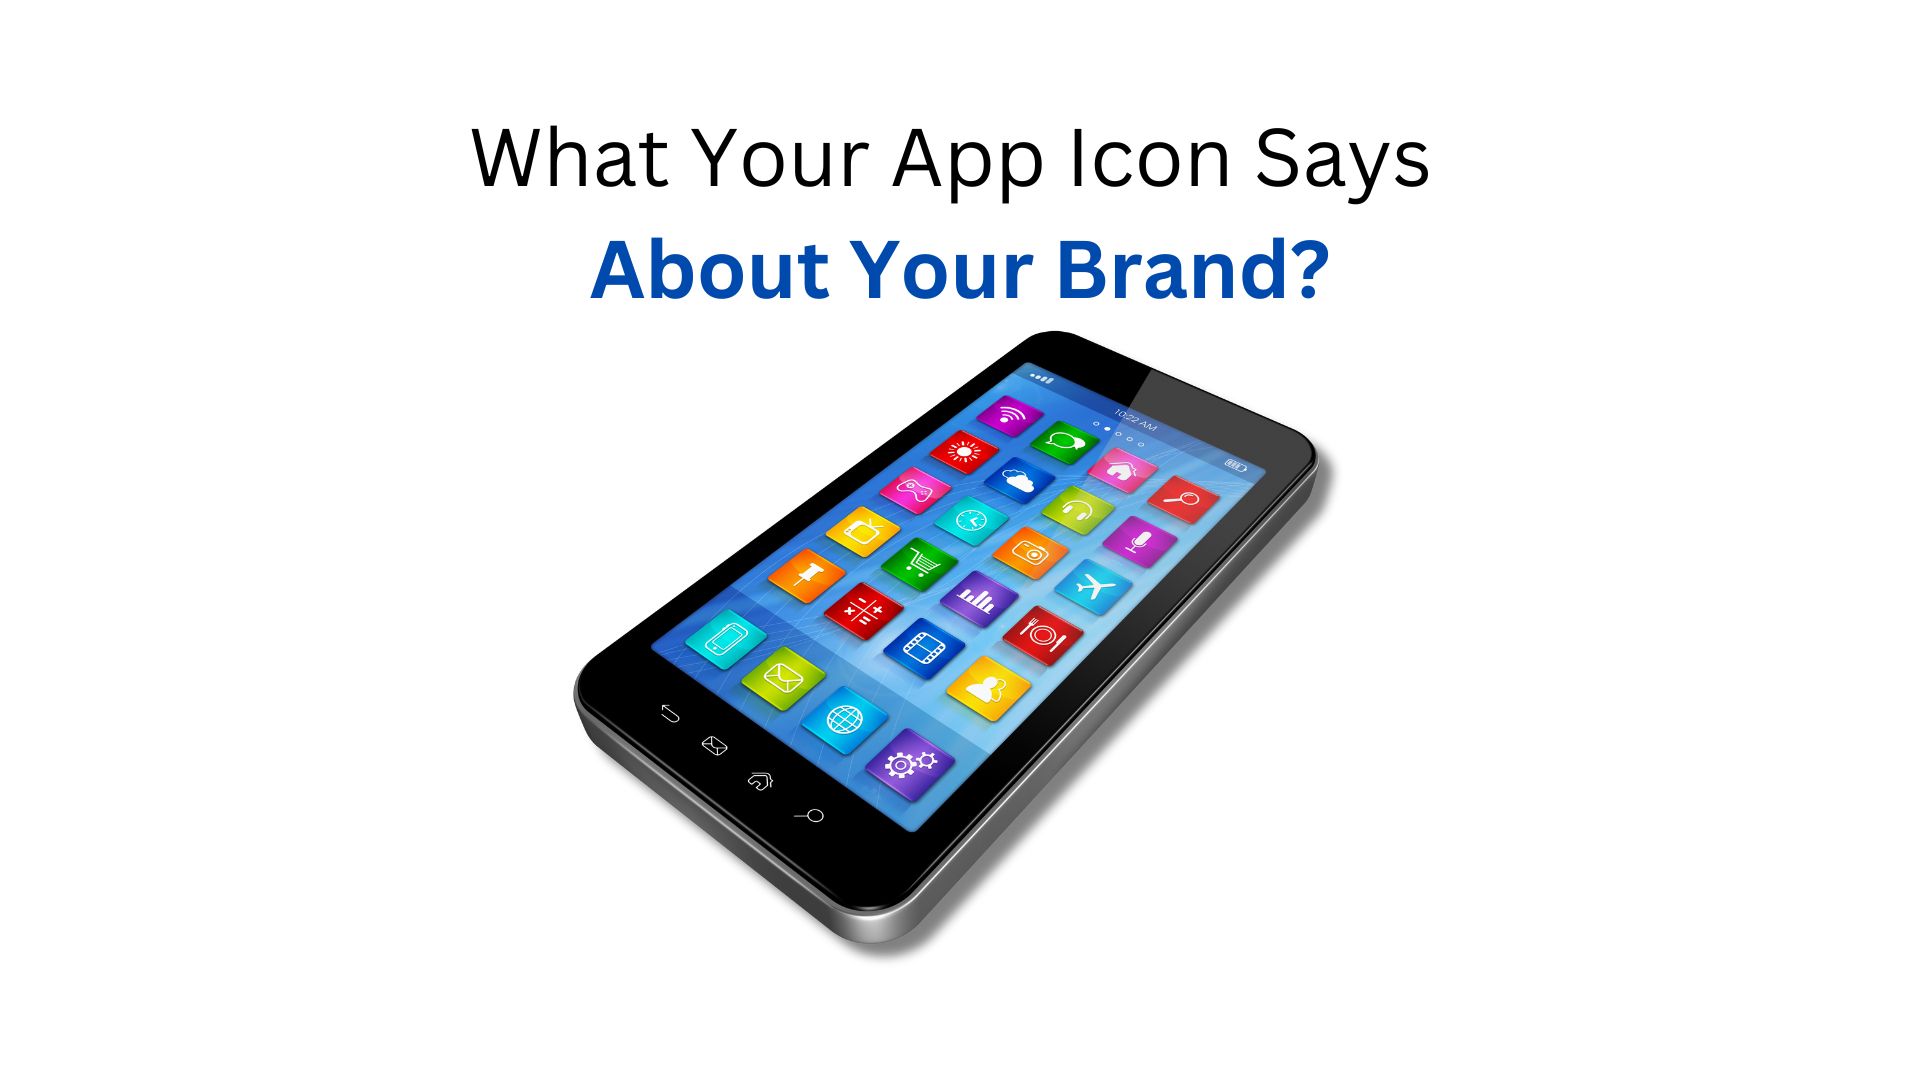 What Your App Icon Says About Your Brand